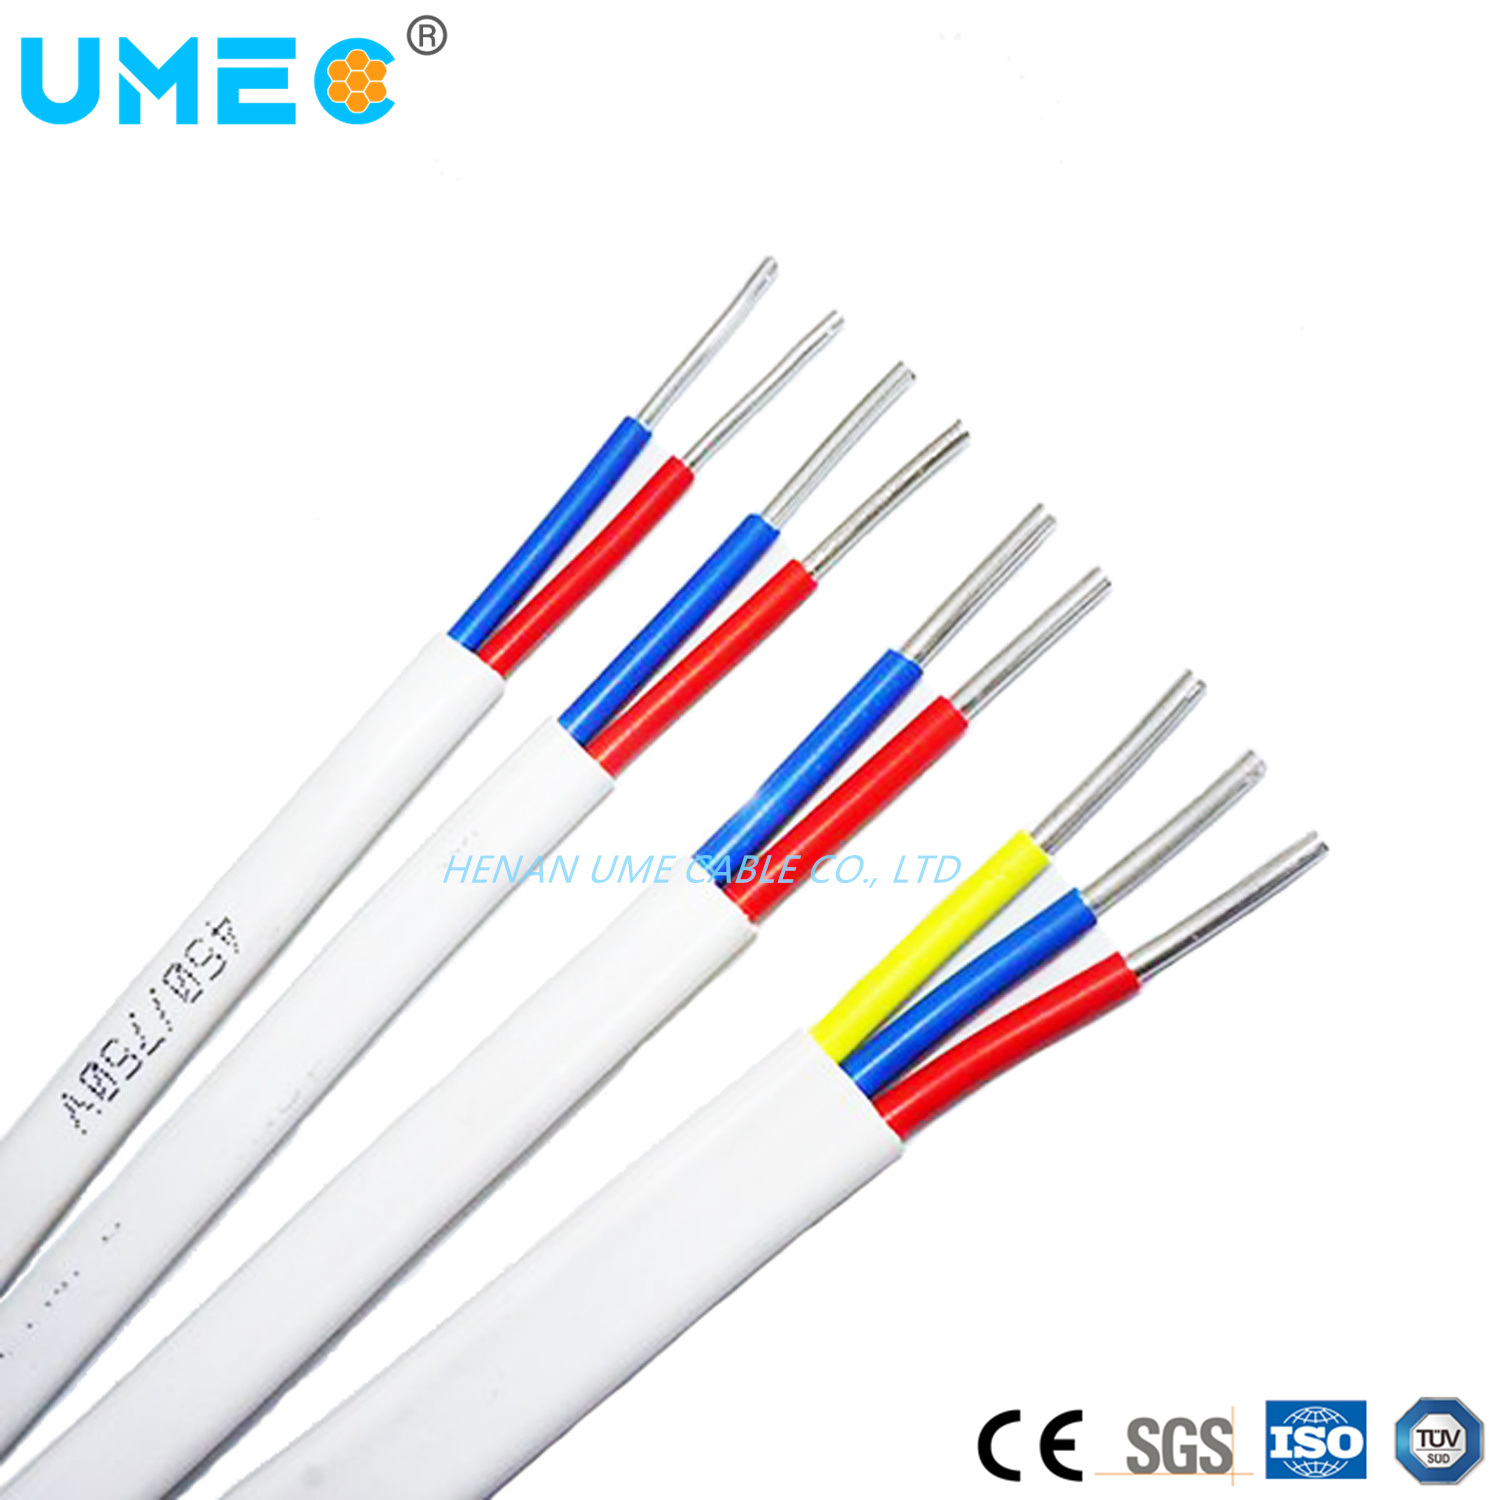 Electrical Solid/Strand/Flexible Conductor PVC/XLPE Insulation Wires